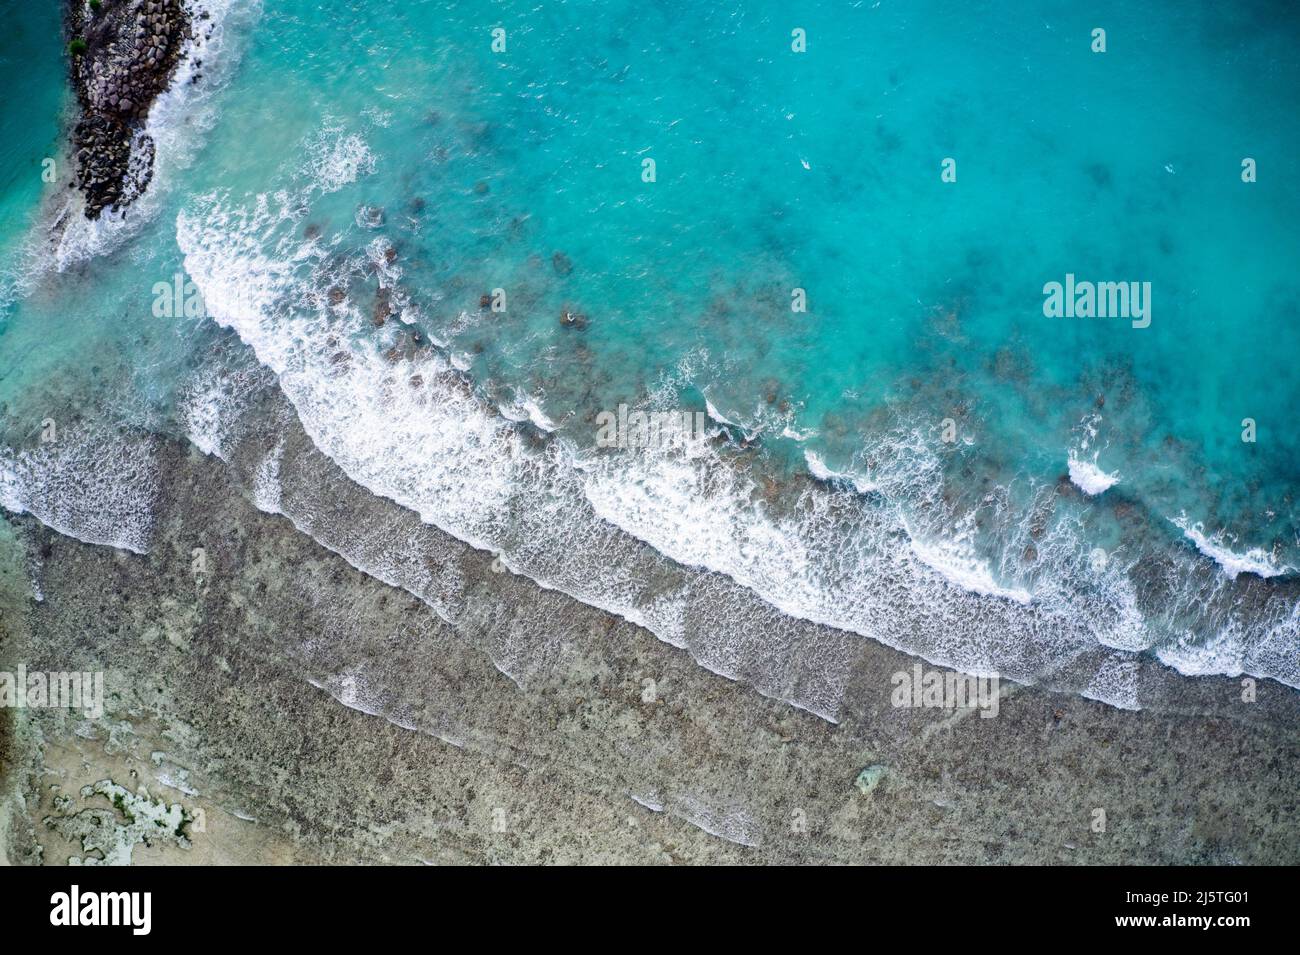 Drone field of view of waves crashing into beach and sand in tropical island paradise of Seychelles. Stock Photo